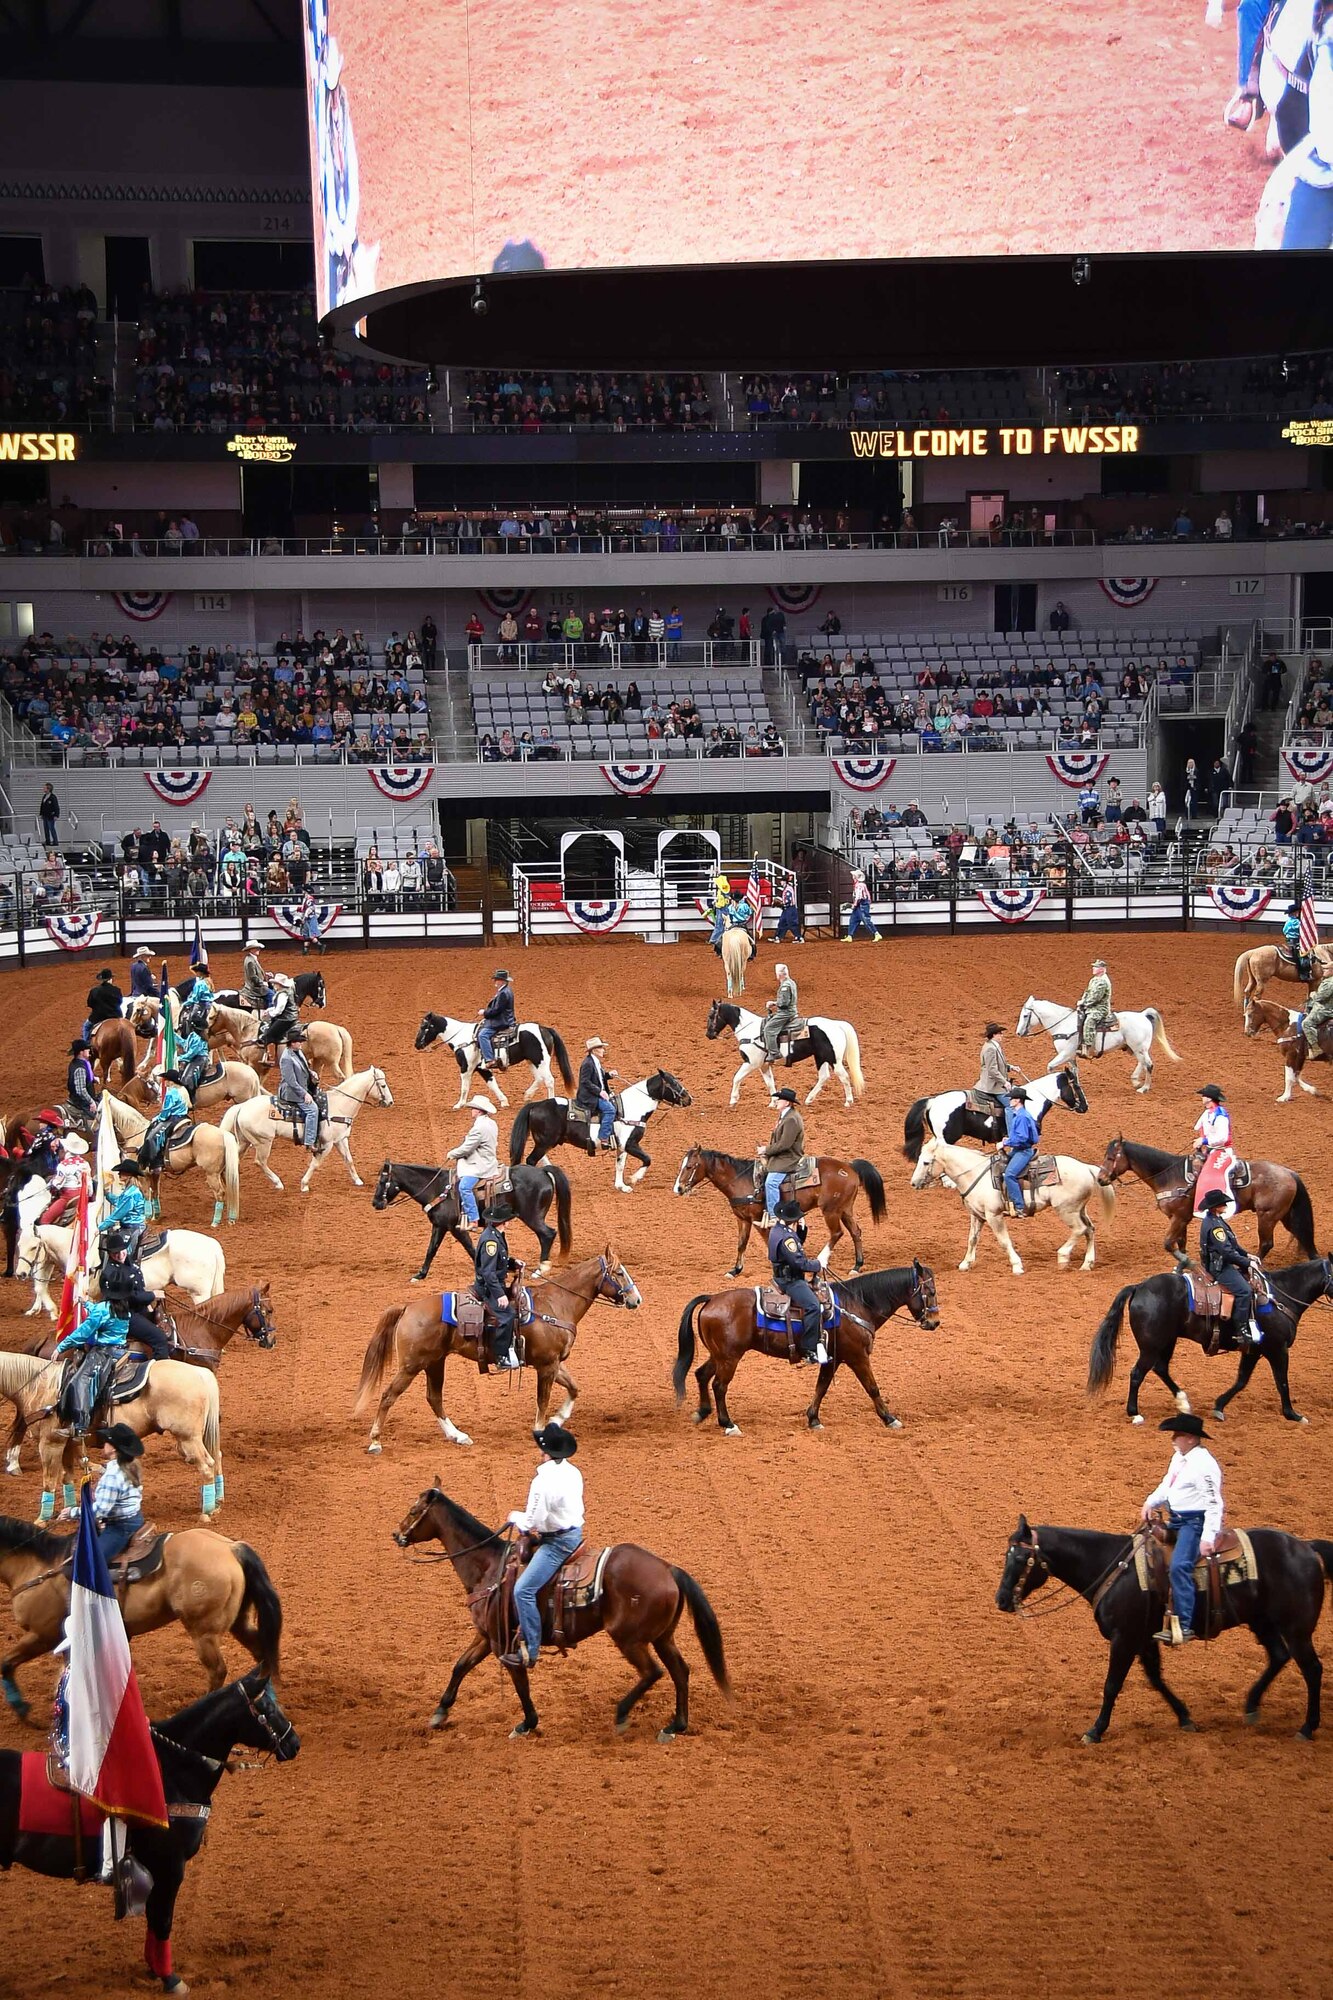 Riders in the Grand Entry weave their way through the six flags of Texas before the rodeo competitions begin at the Fort Worth Stock Show and Rodeo at Dickie’s Arena on February 3, 2020. The FWSSR is the oldest continuously running livestock show and rodeo and has been held annually in Fort Worth, Texas since 1896. (U.S. Air Force Photo by Master Sgt. Jeremy Roman)